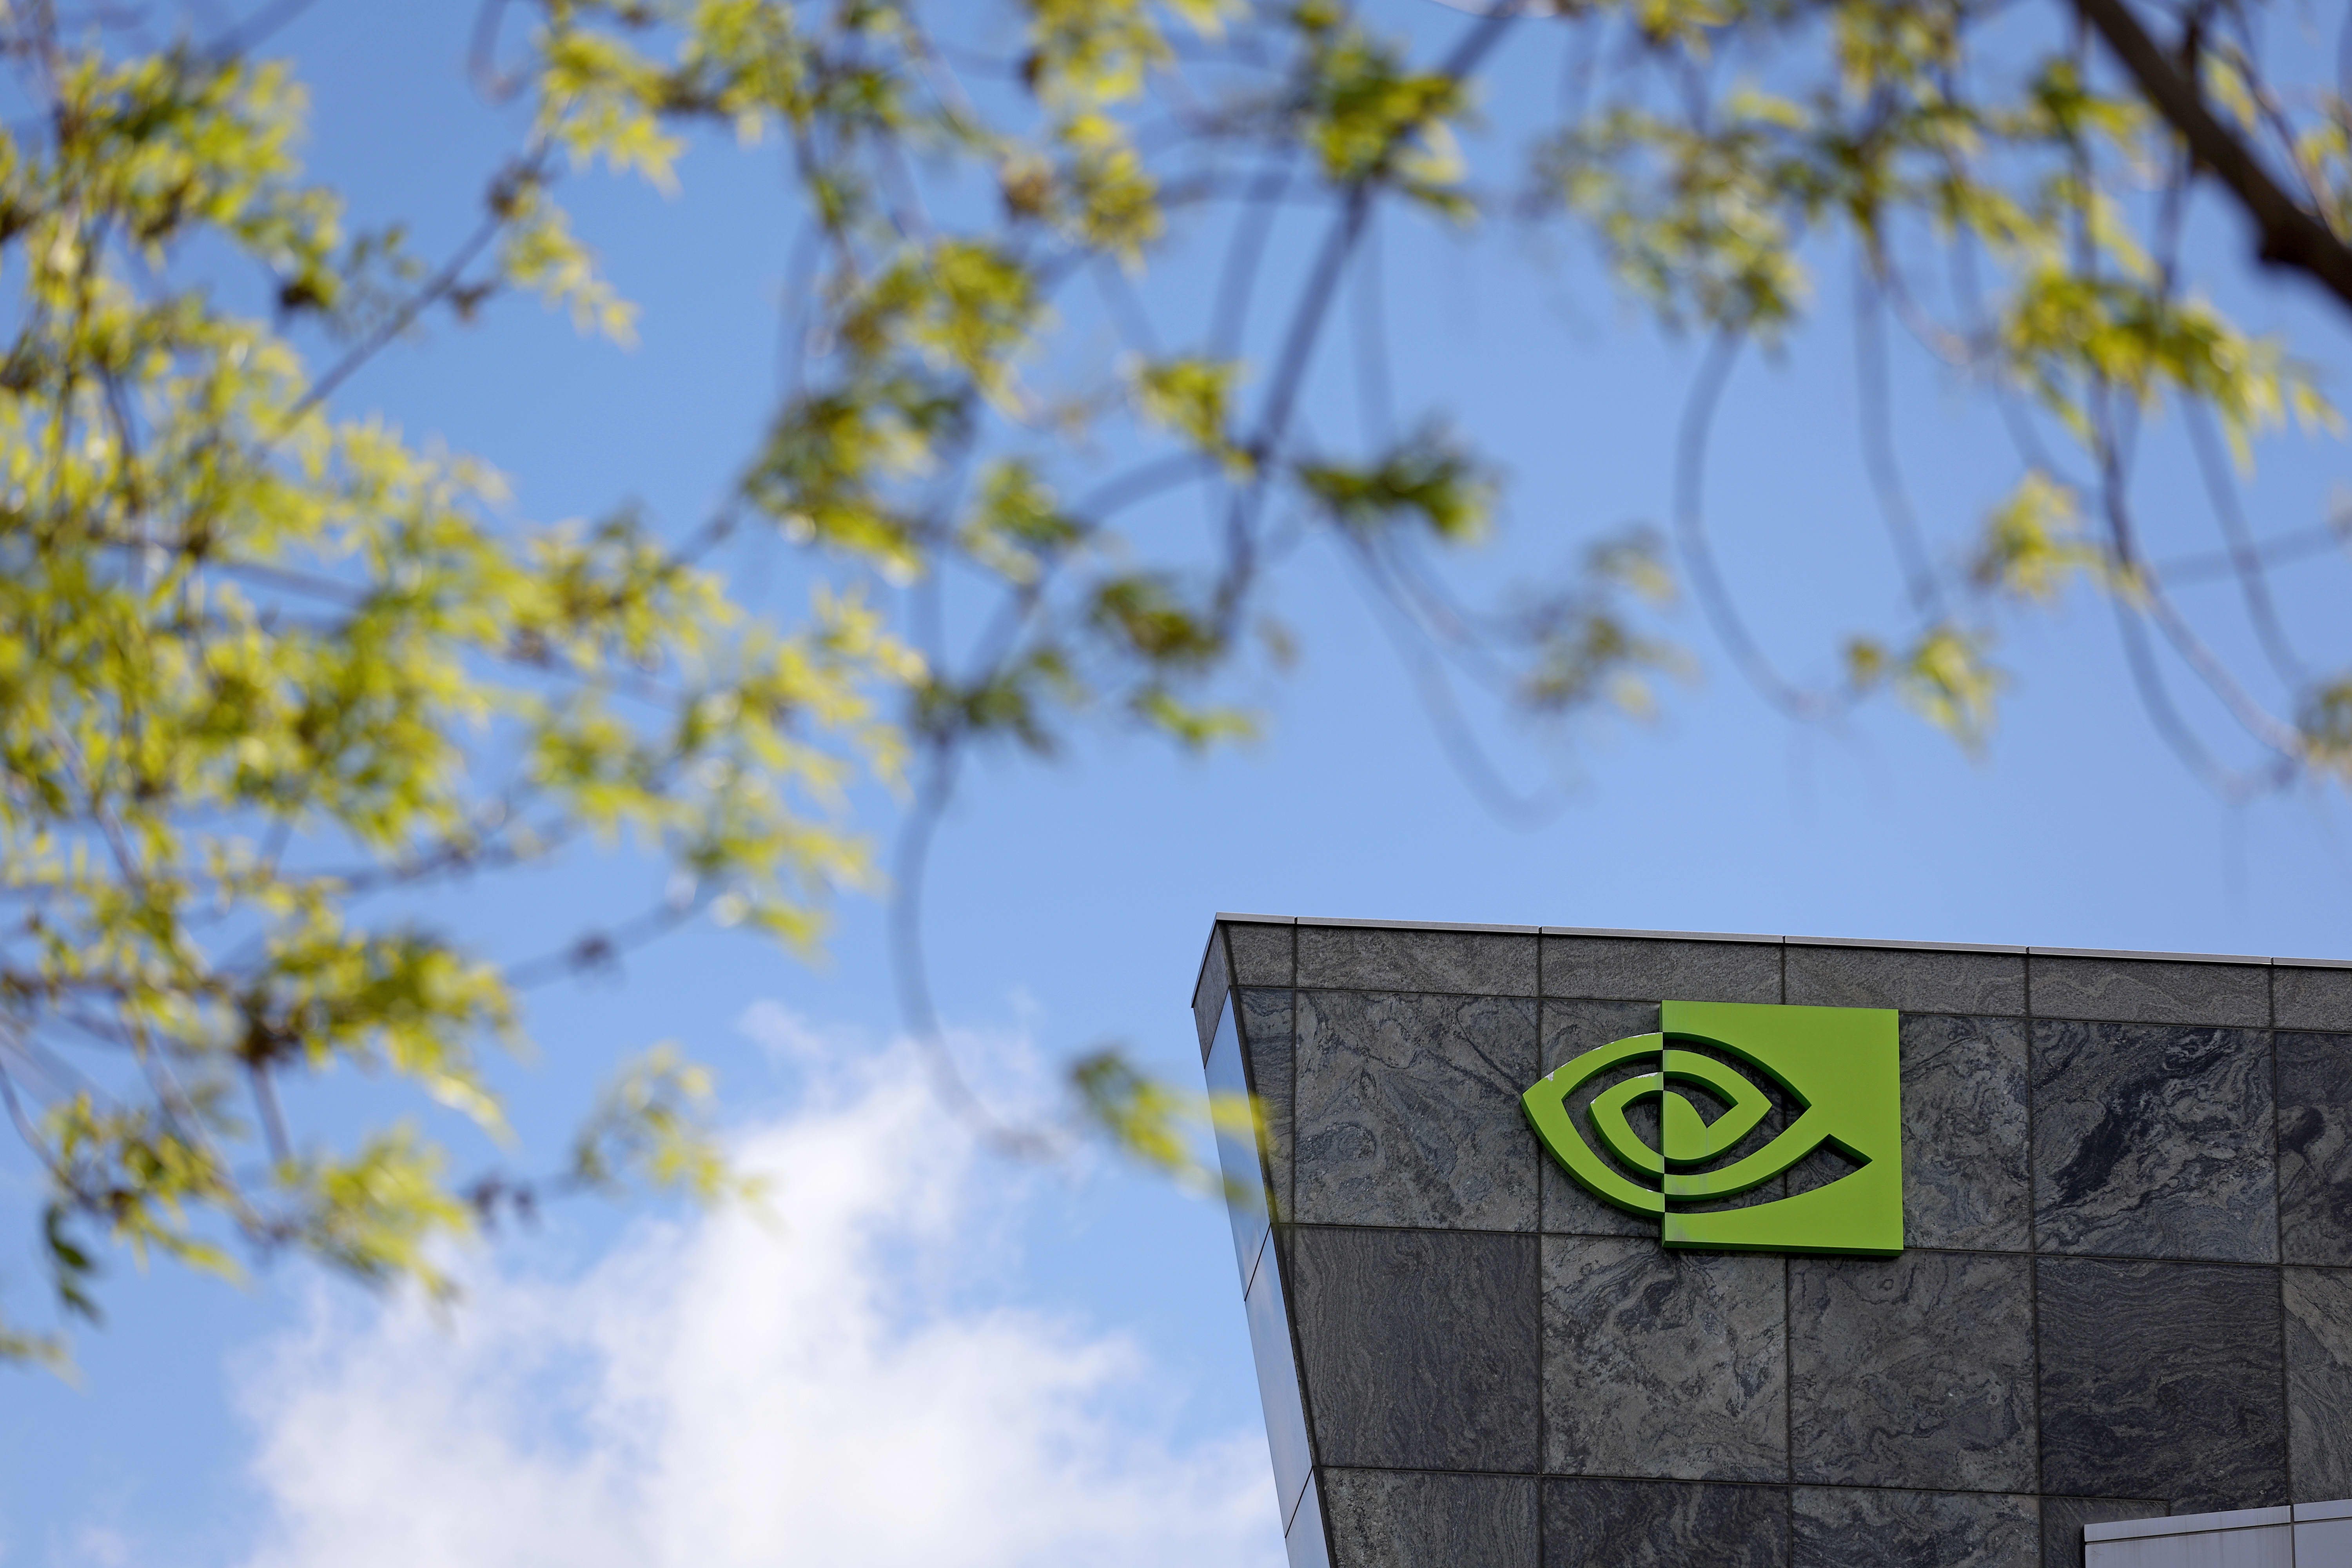 Nvidia's 'dominant A.I. leadership' is clear after GTC developer conference, Wall Street analysts say